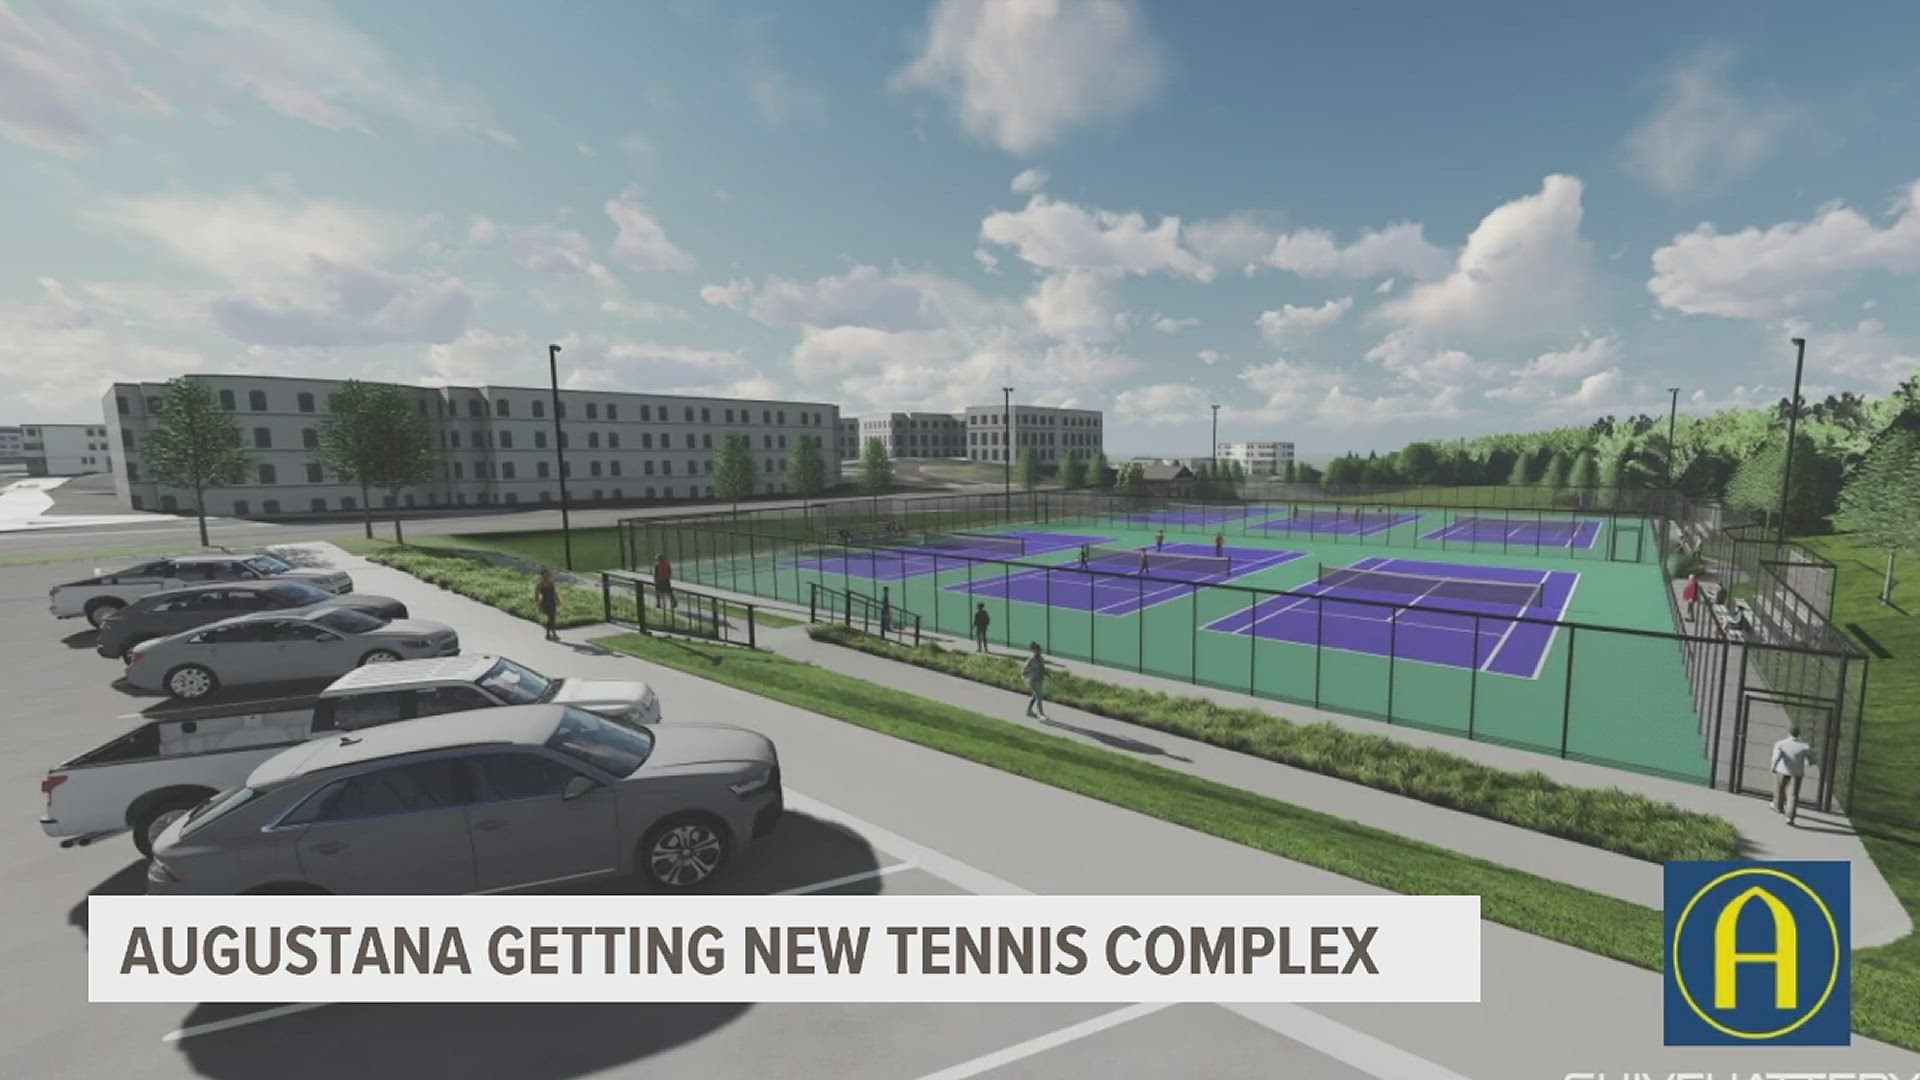 The $1.5 million project will bring six collegiate regulation tennis courts to Lincoln Park by campus.